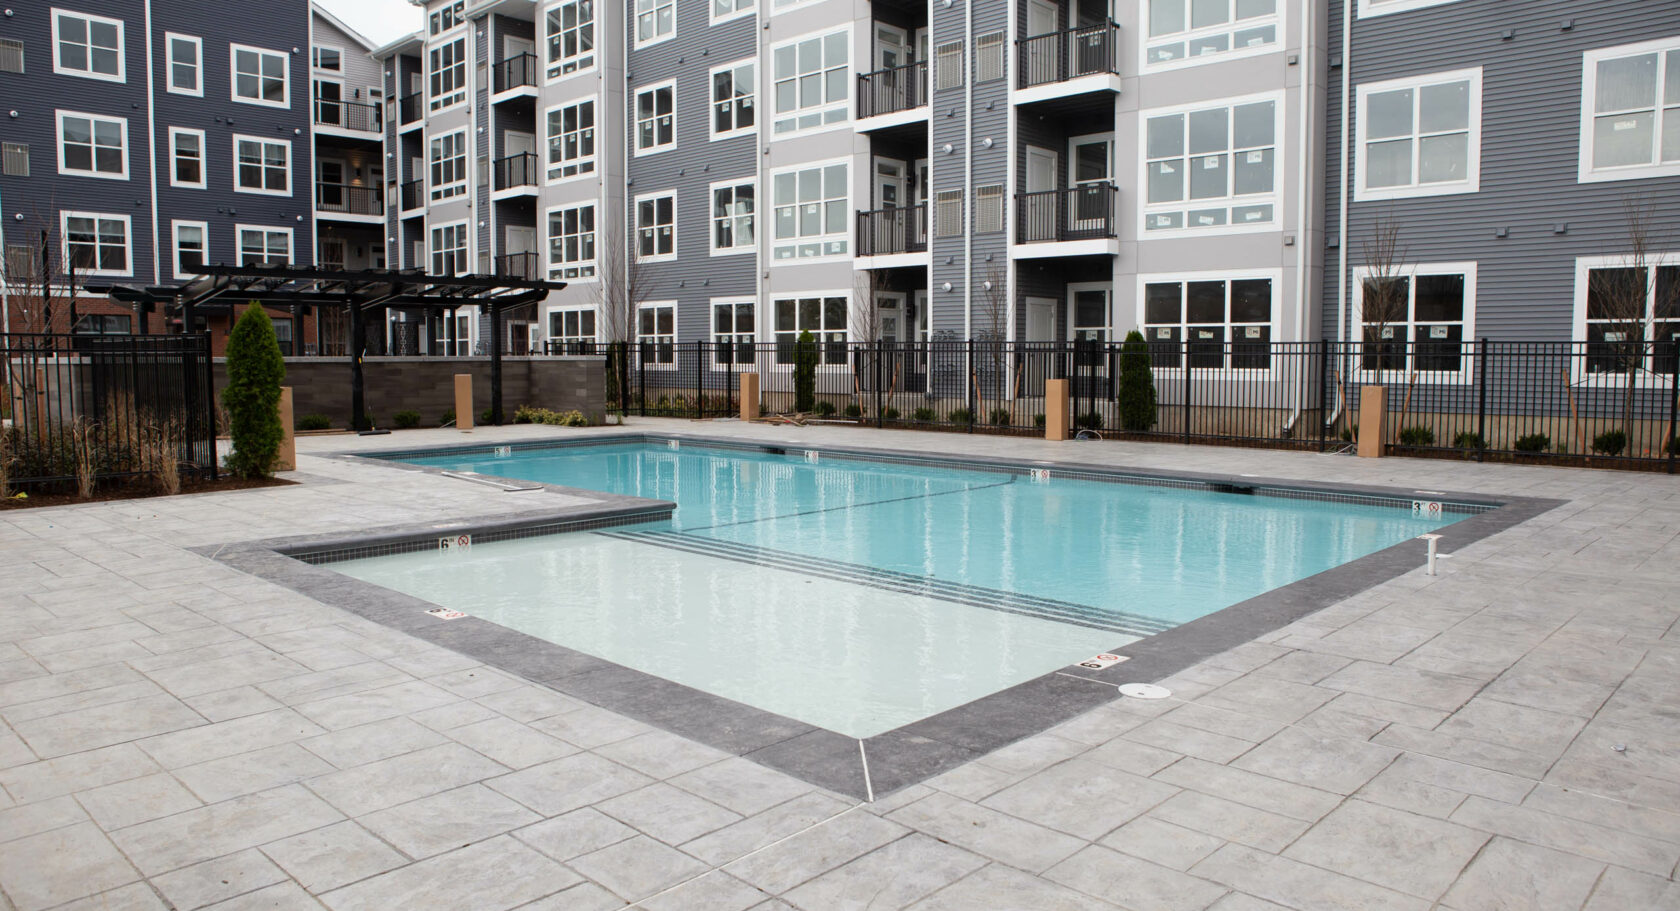 Stamped concrete pool dock in a Massachusetts apartment complex. Commercial concrete work by Dex by Terra.